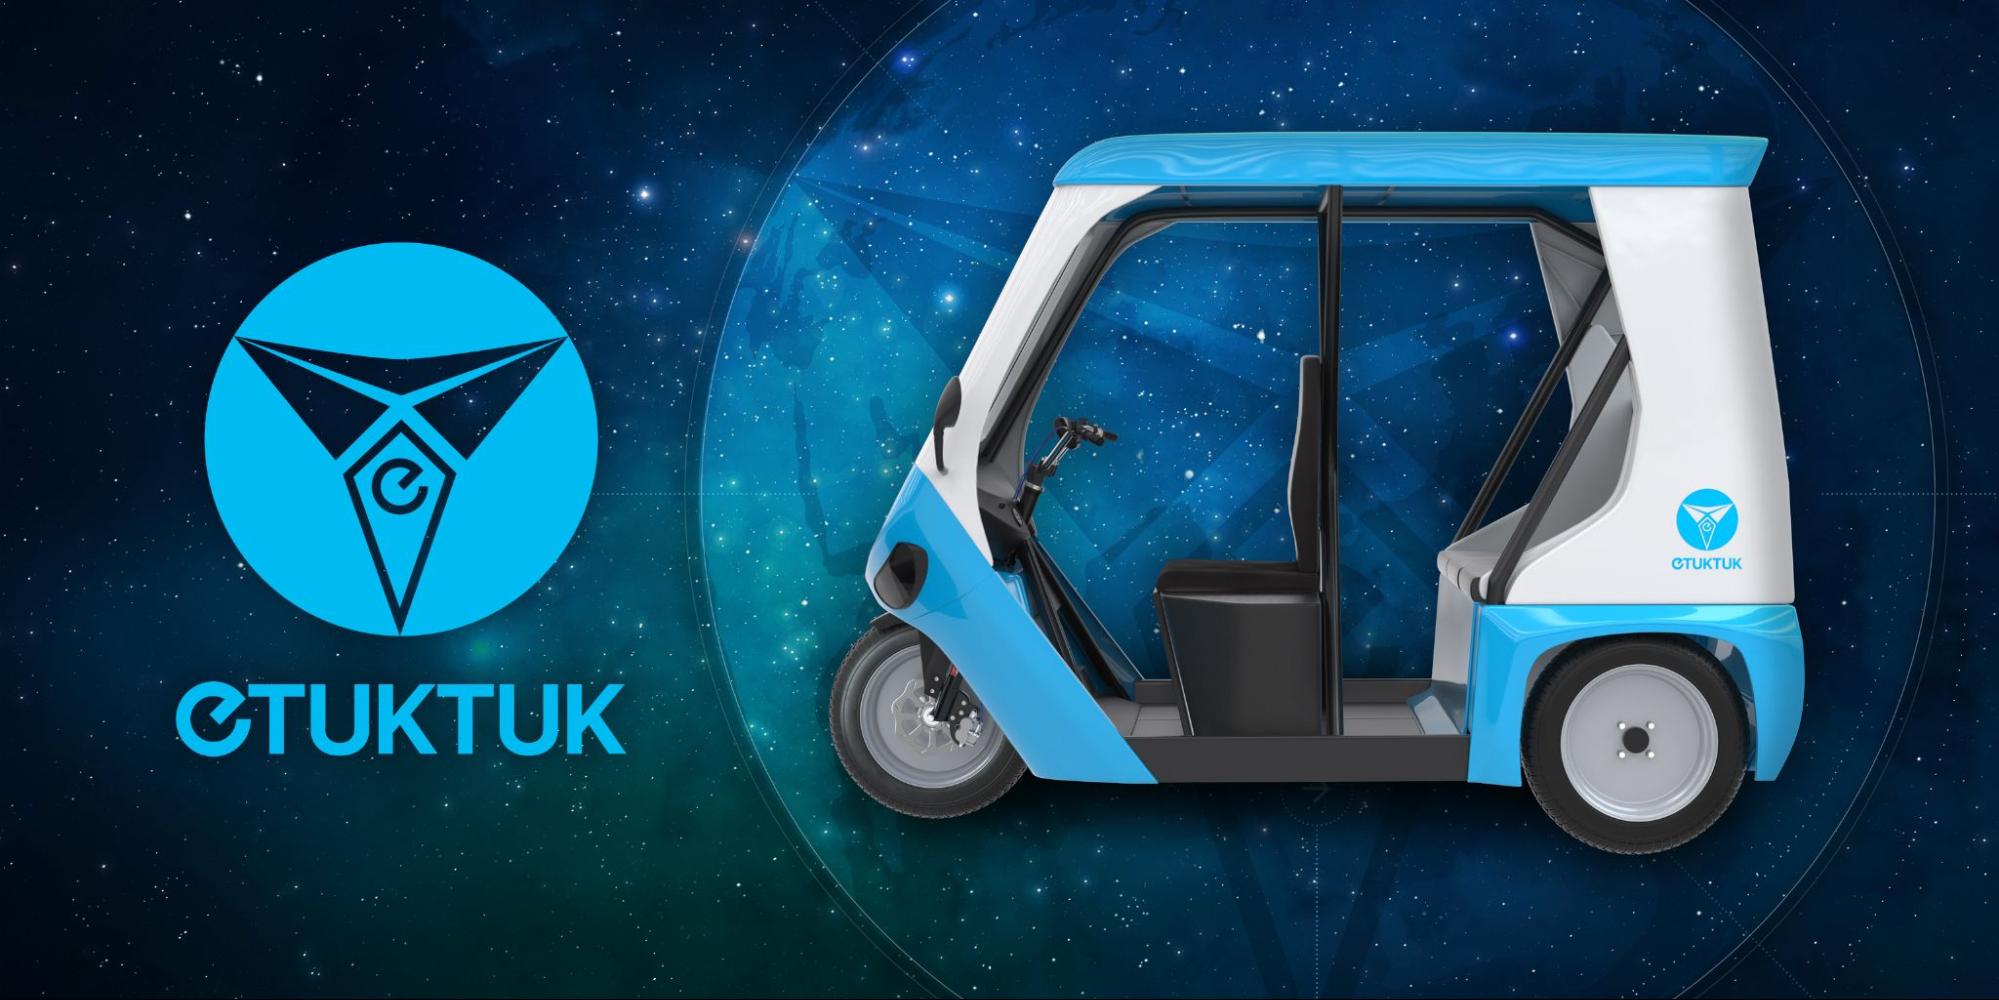 eTukTuk is a Transportation Revolution: 5 Reasons How This Groundbreaking Web3 Project Fights Climate Change and Provides Earnings